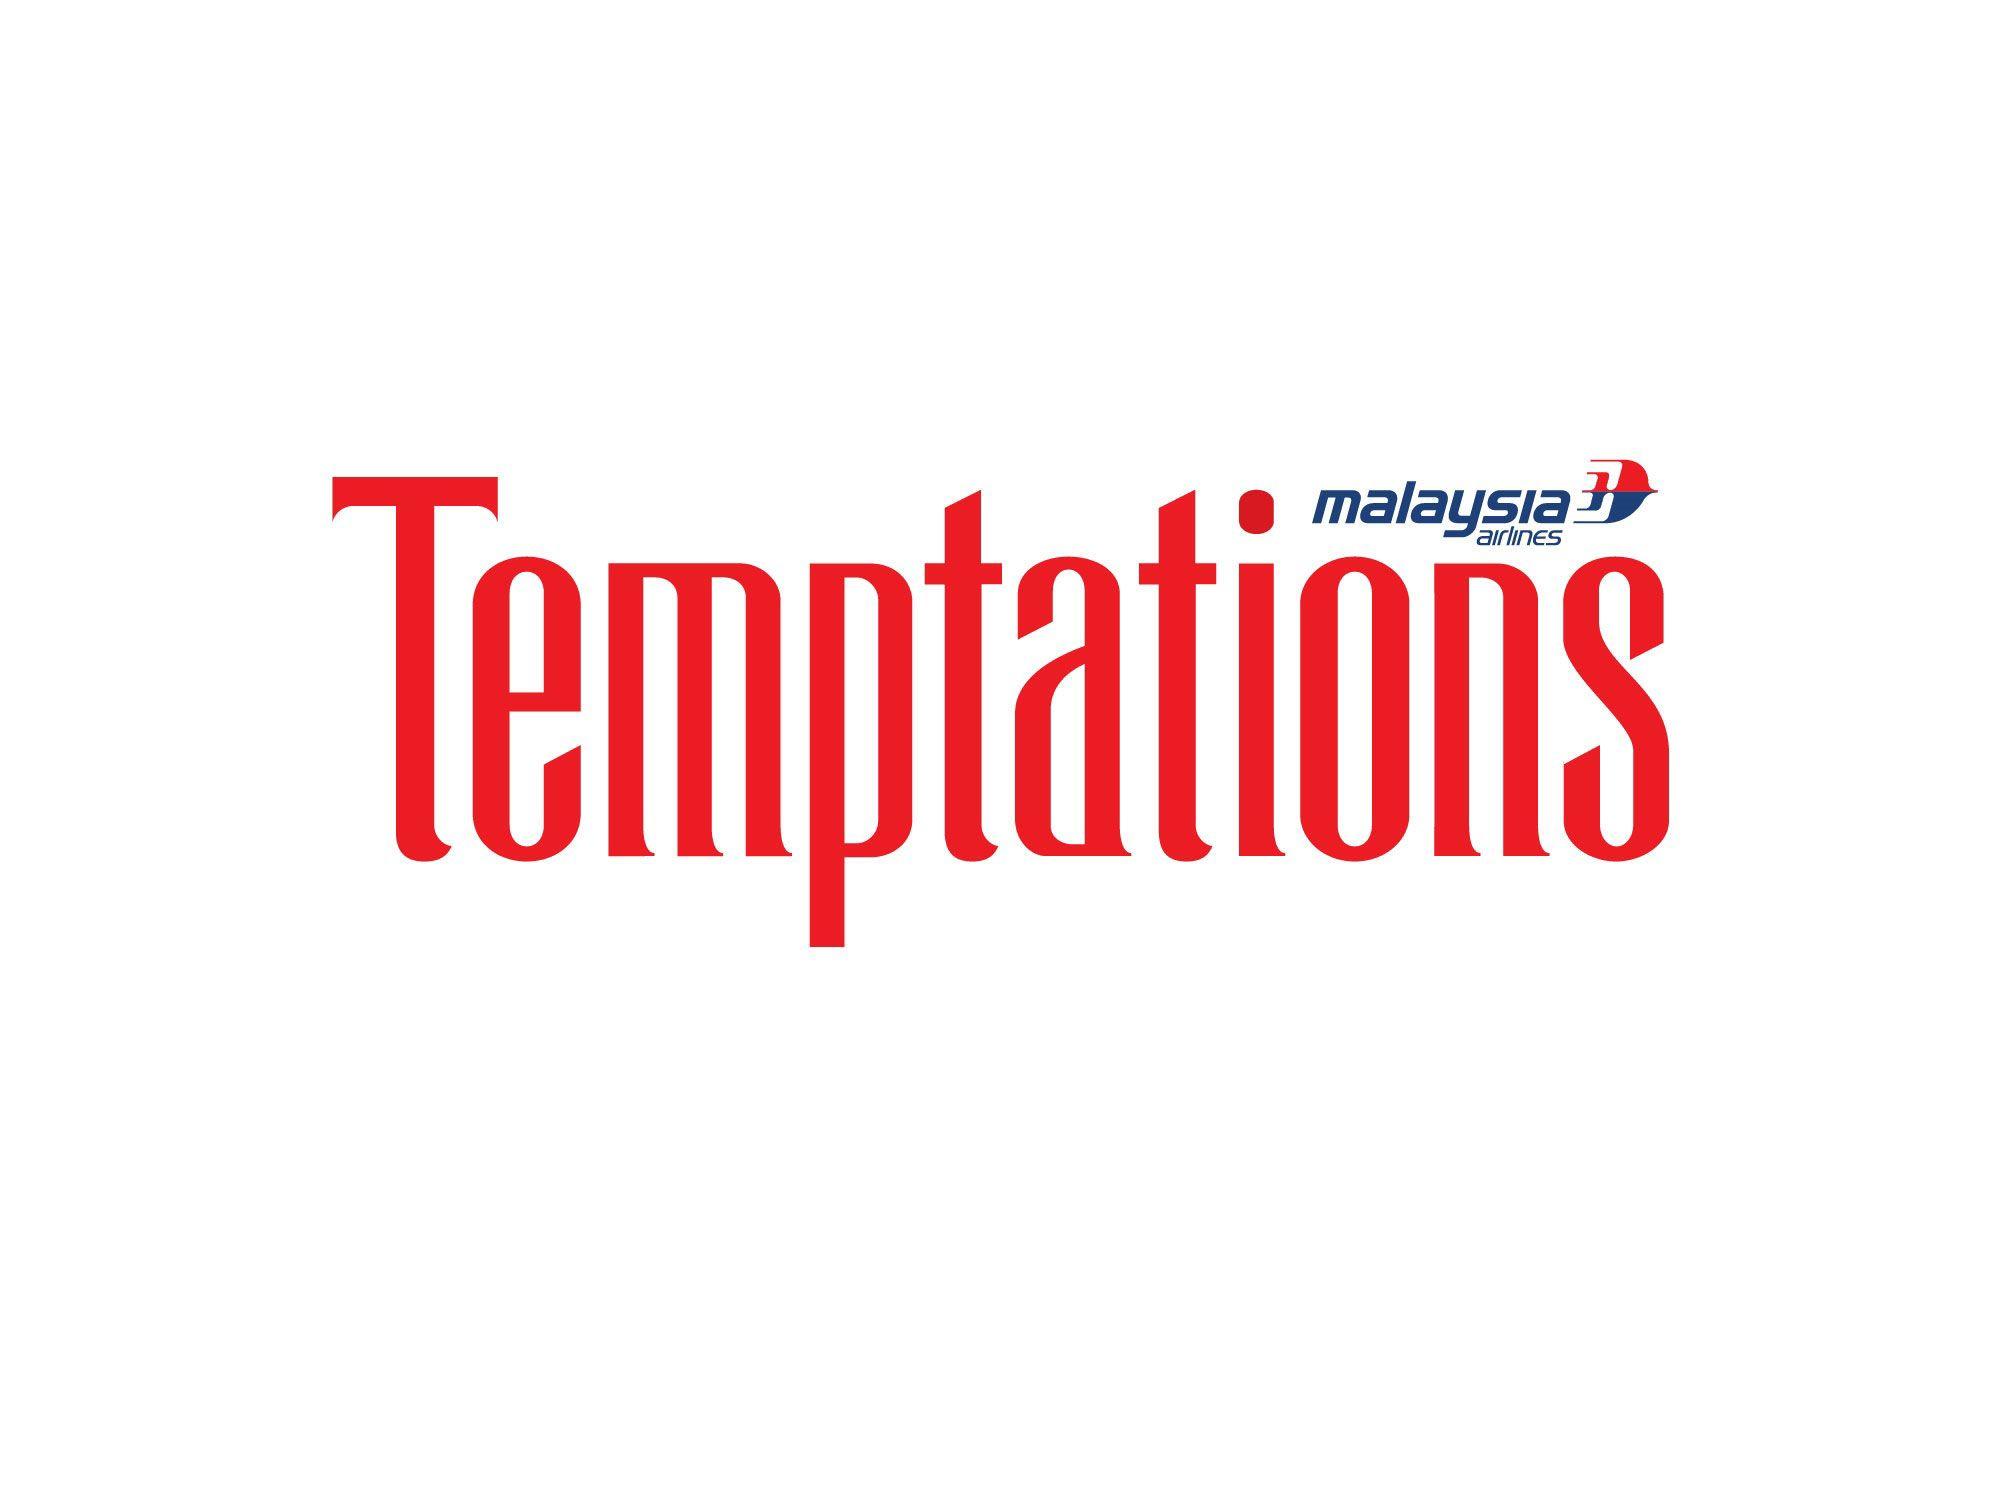 Malaysian Airlines Logo - Temptations In Flight Shopping